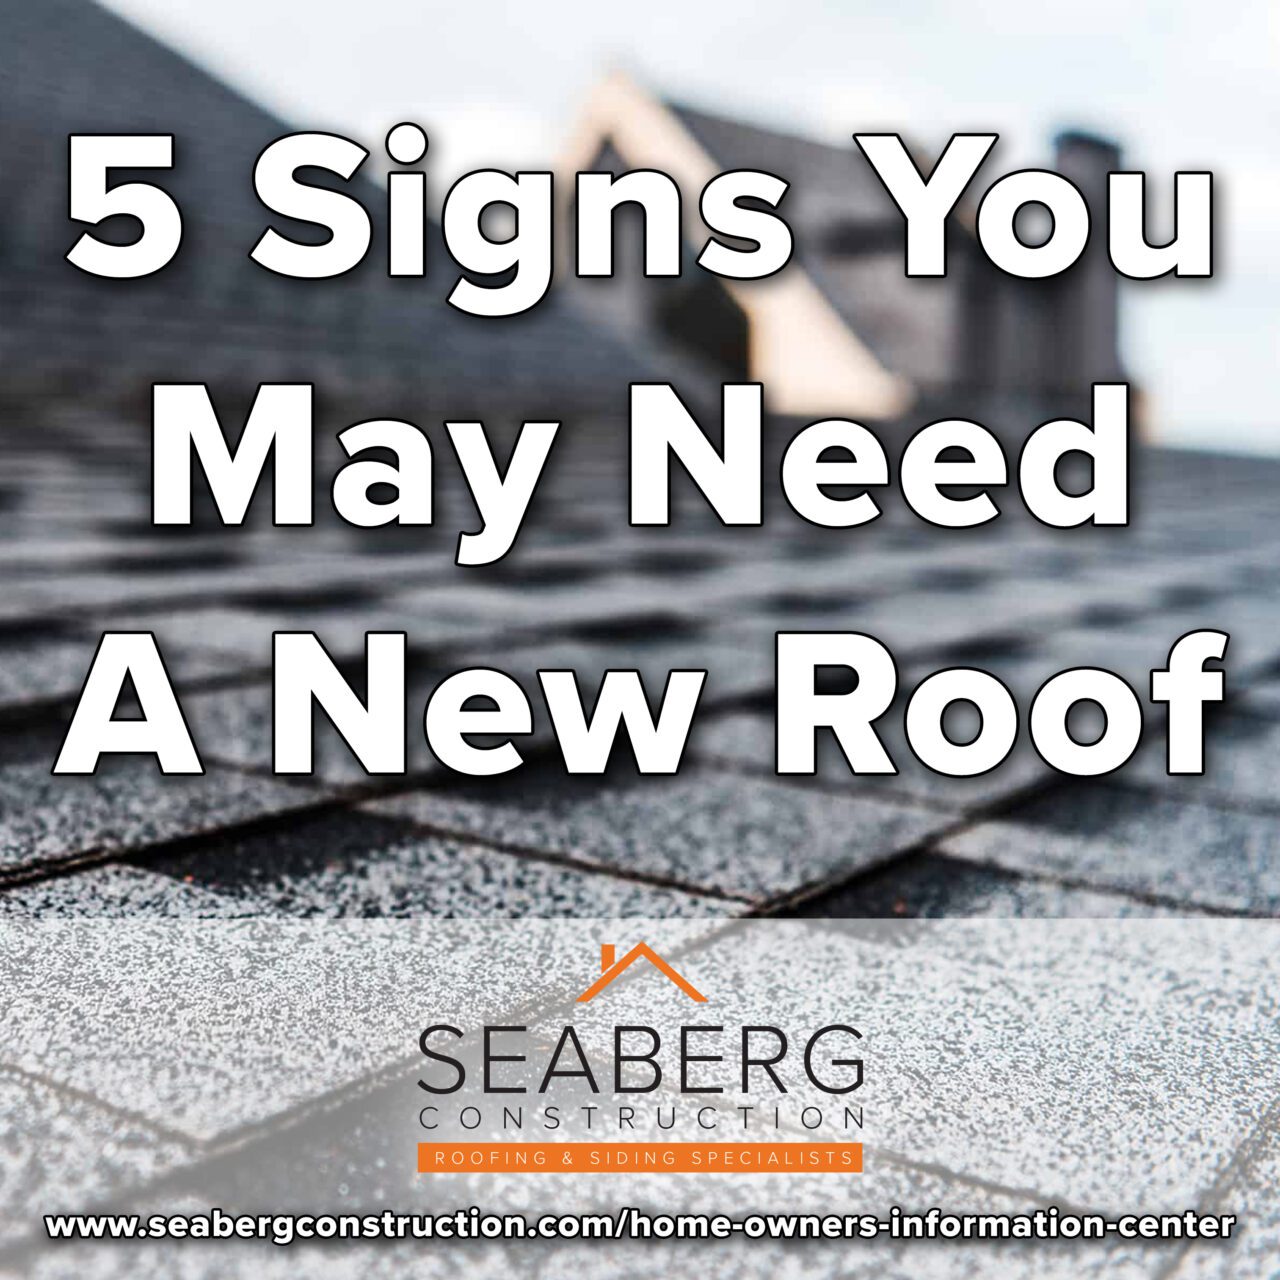 Seaberg Construction Blog - 5 Signs You May Need A New Roof